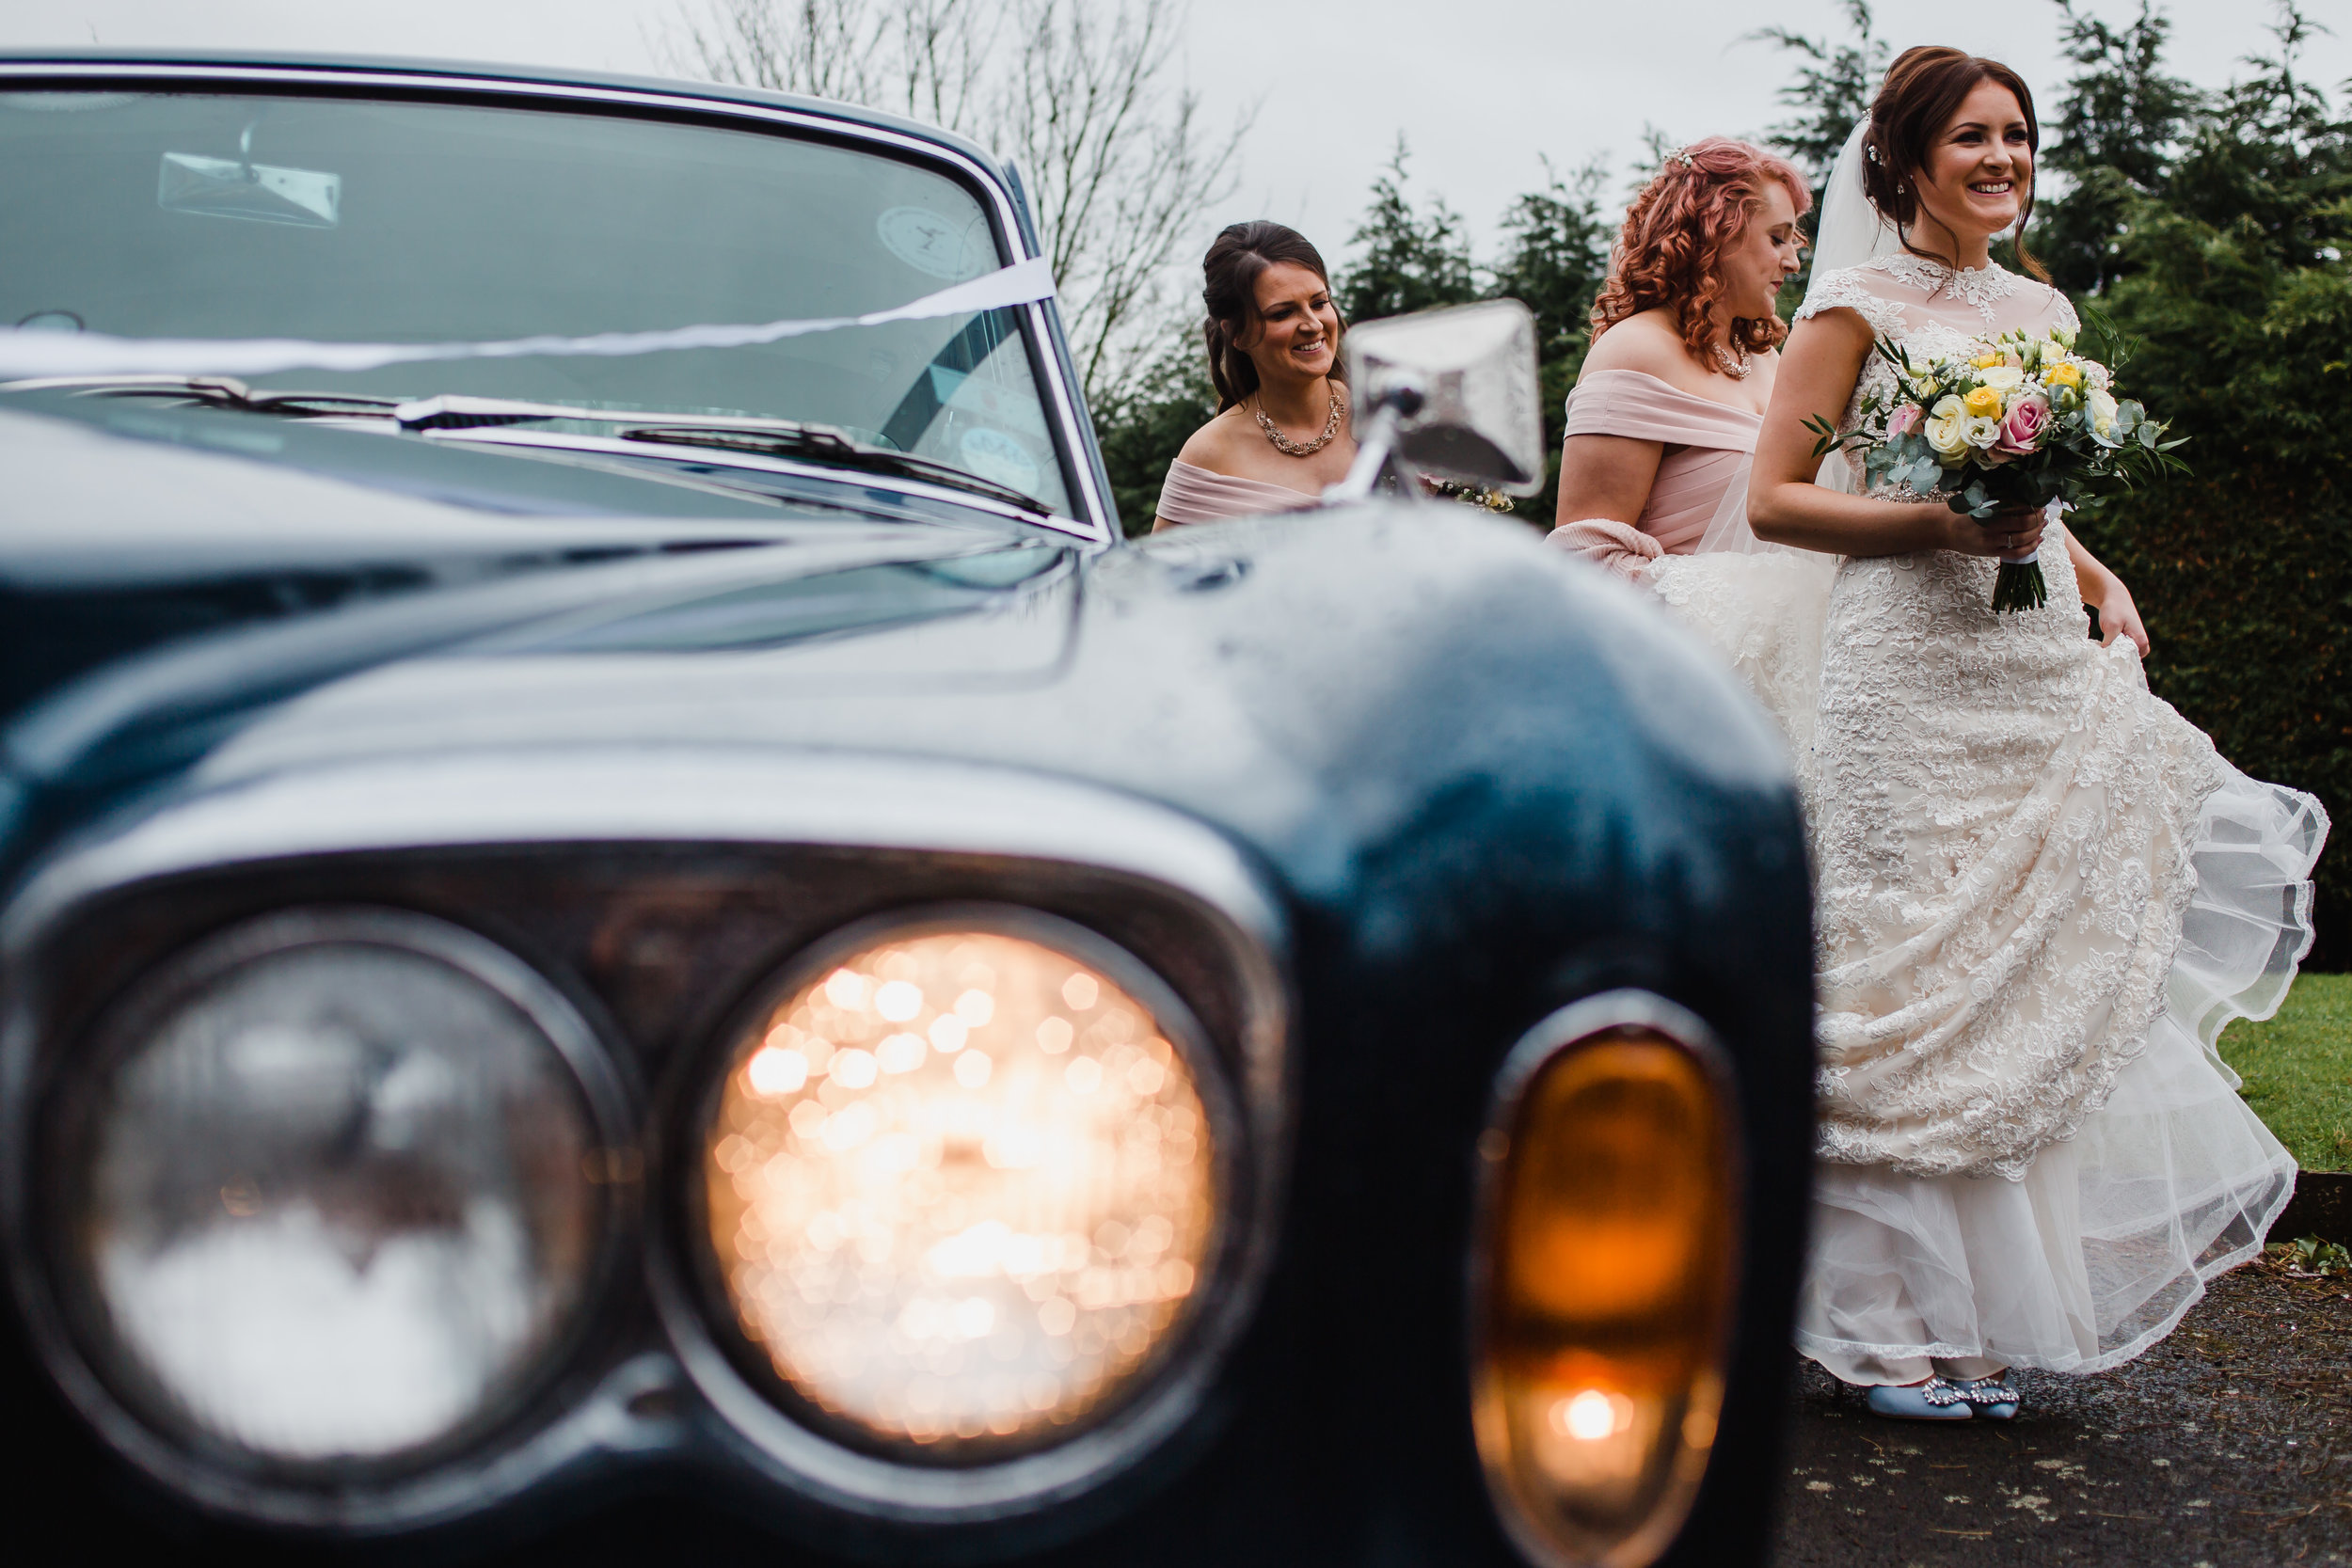 a bride and her bridesmaids arrive at a wedding in a rolls royce